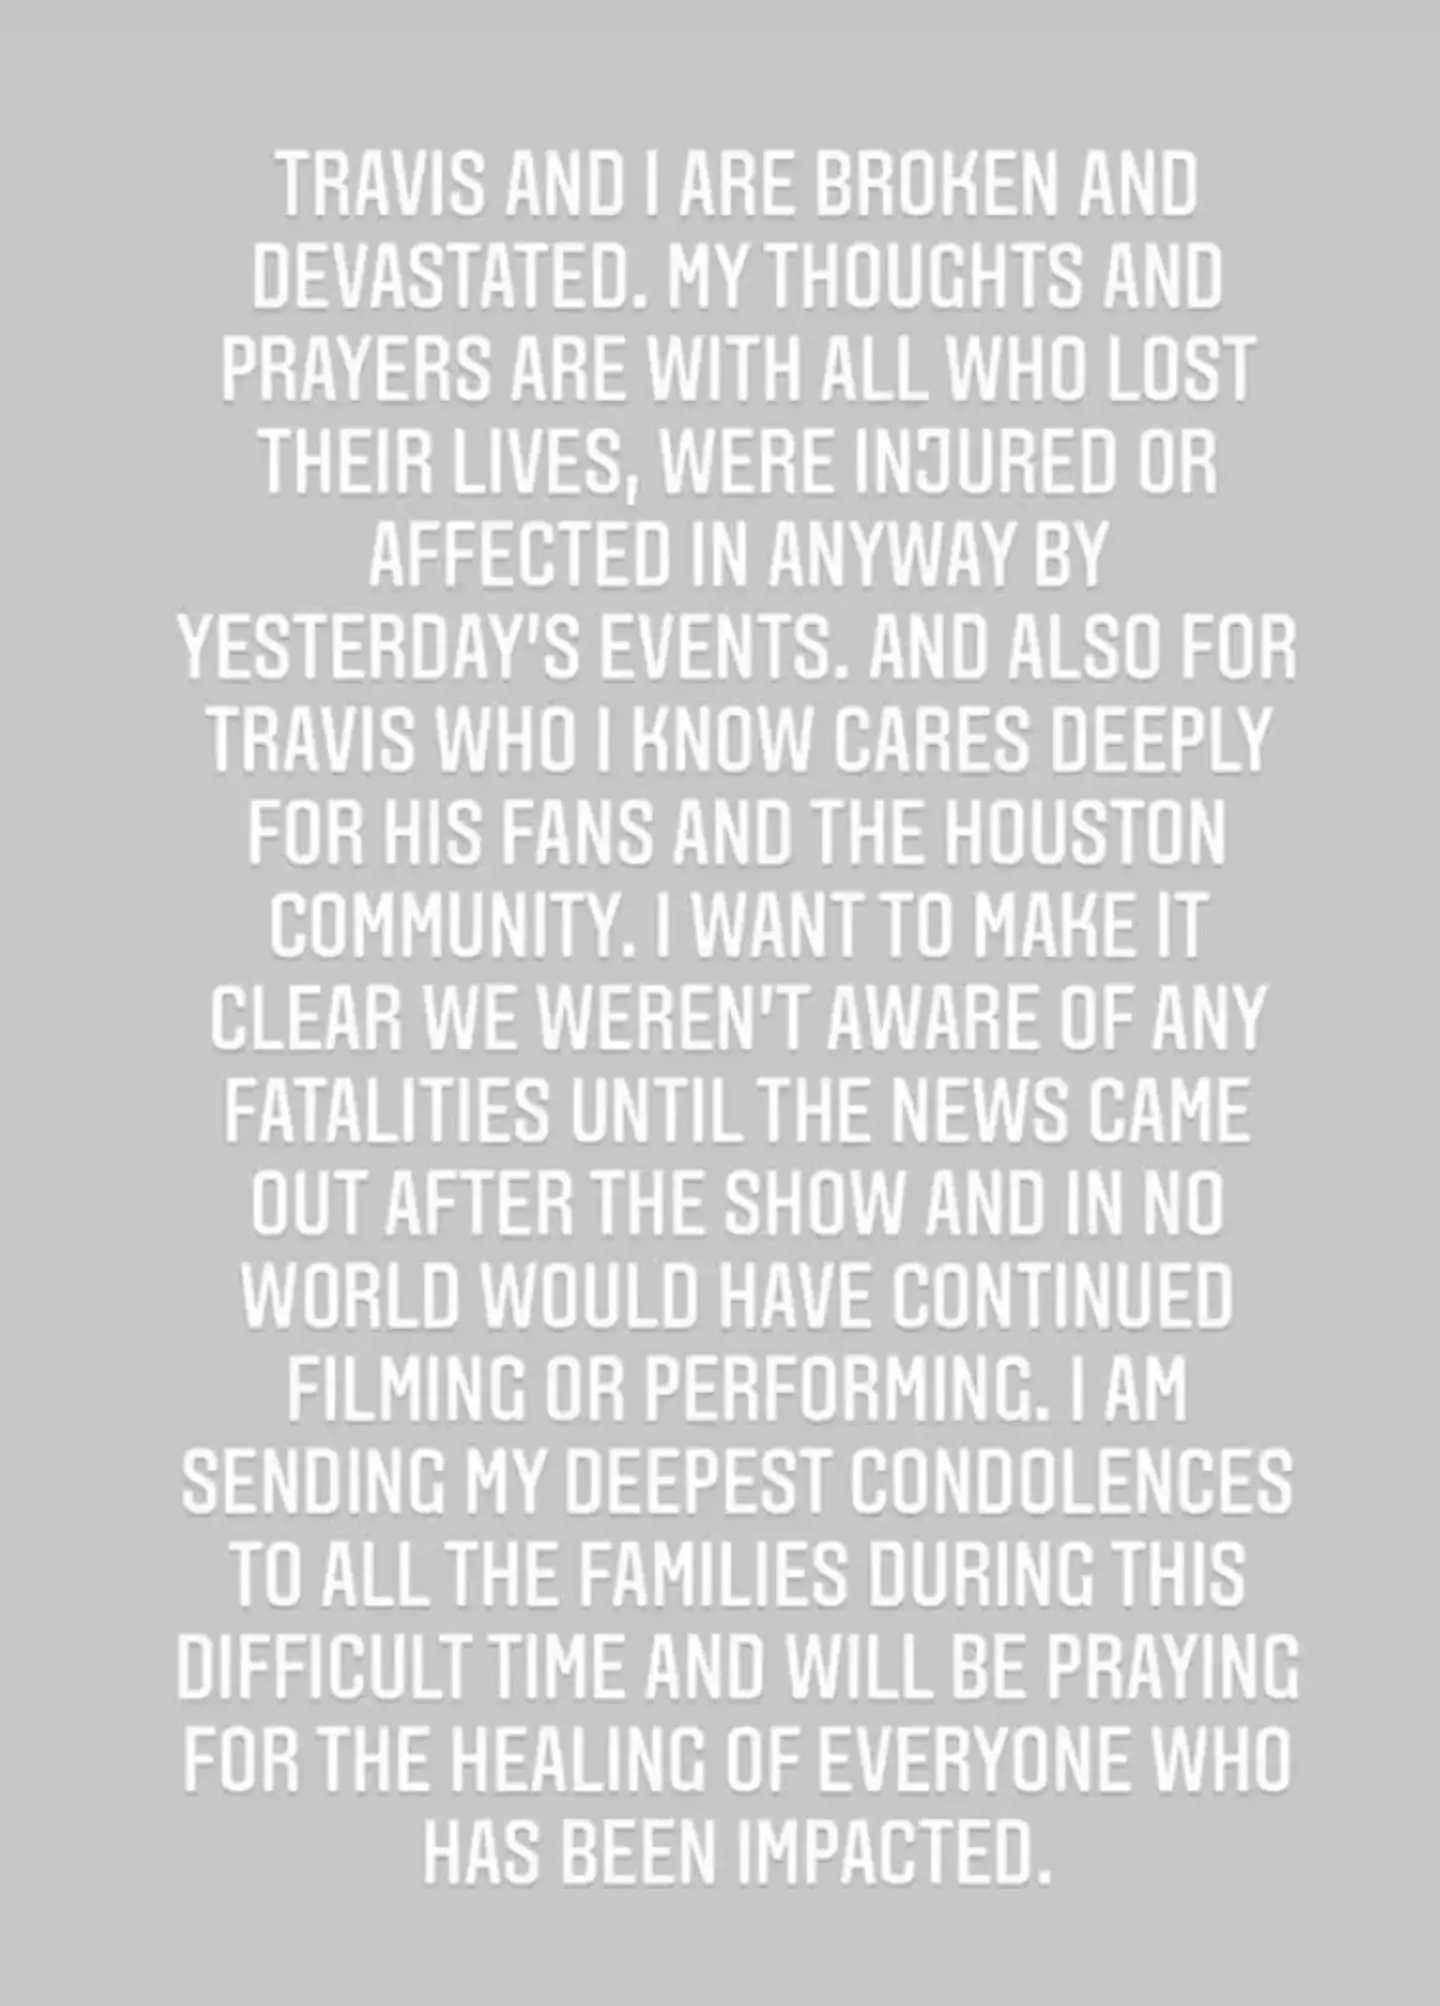 Kylie posted a statement after the event (